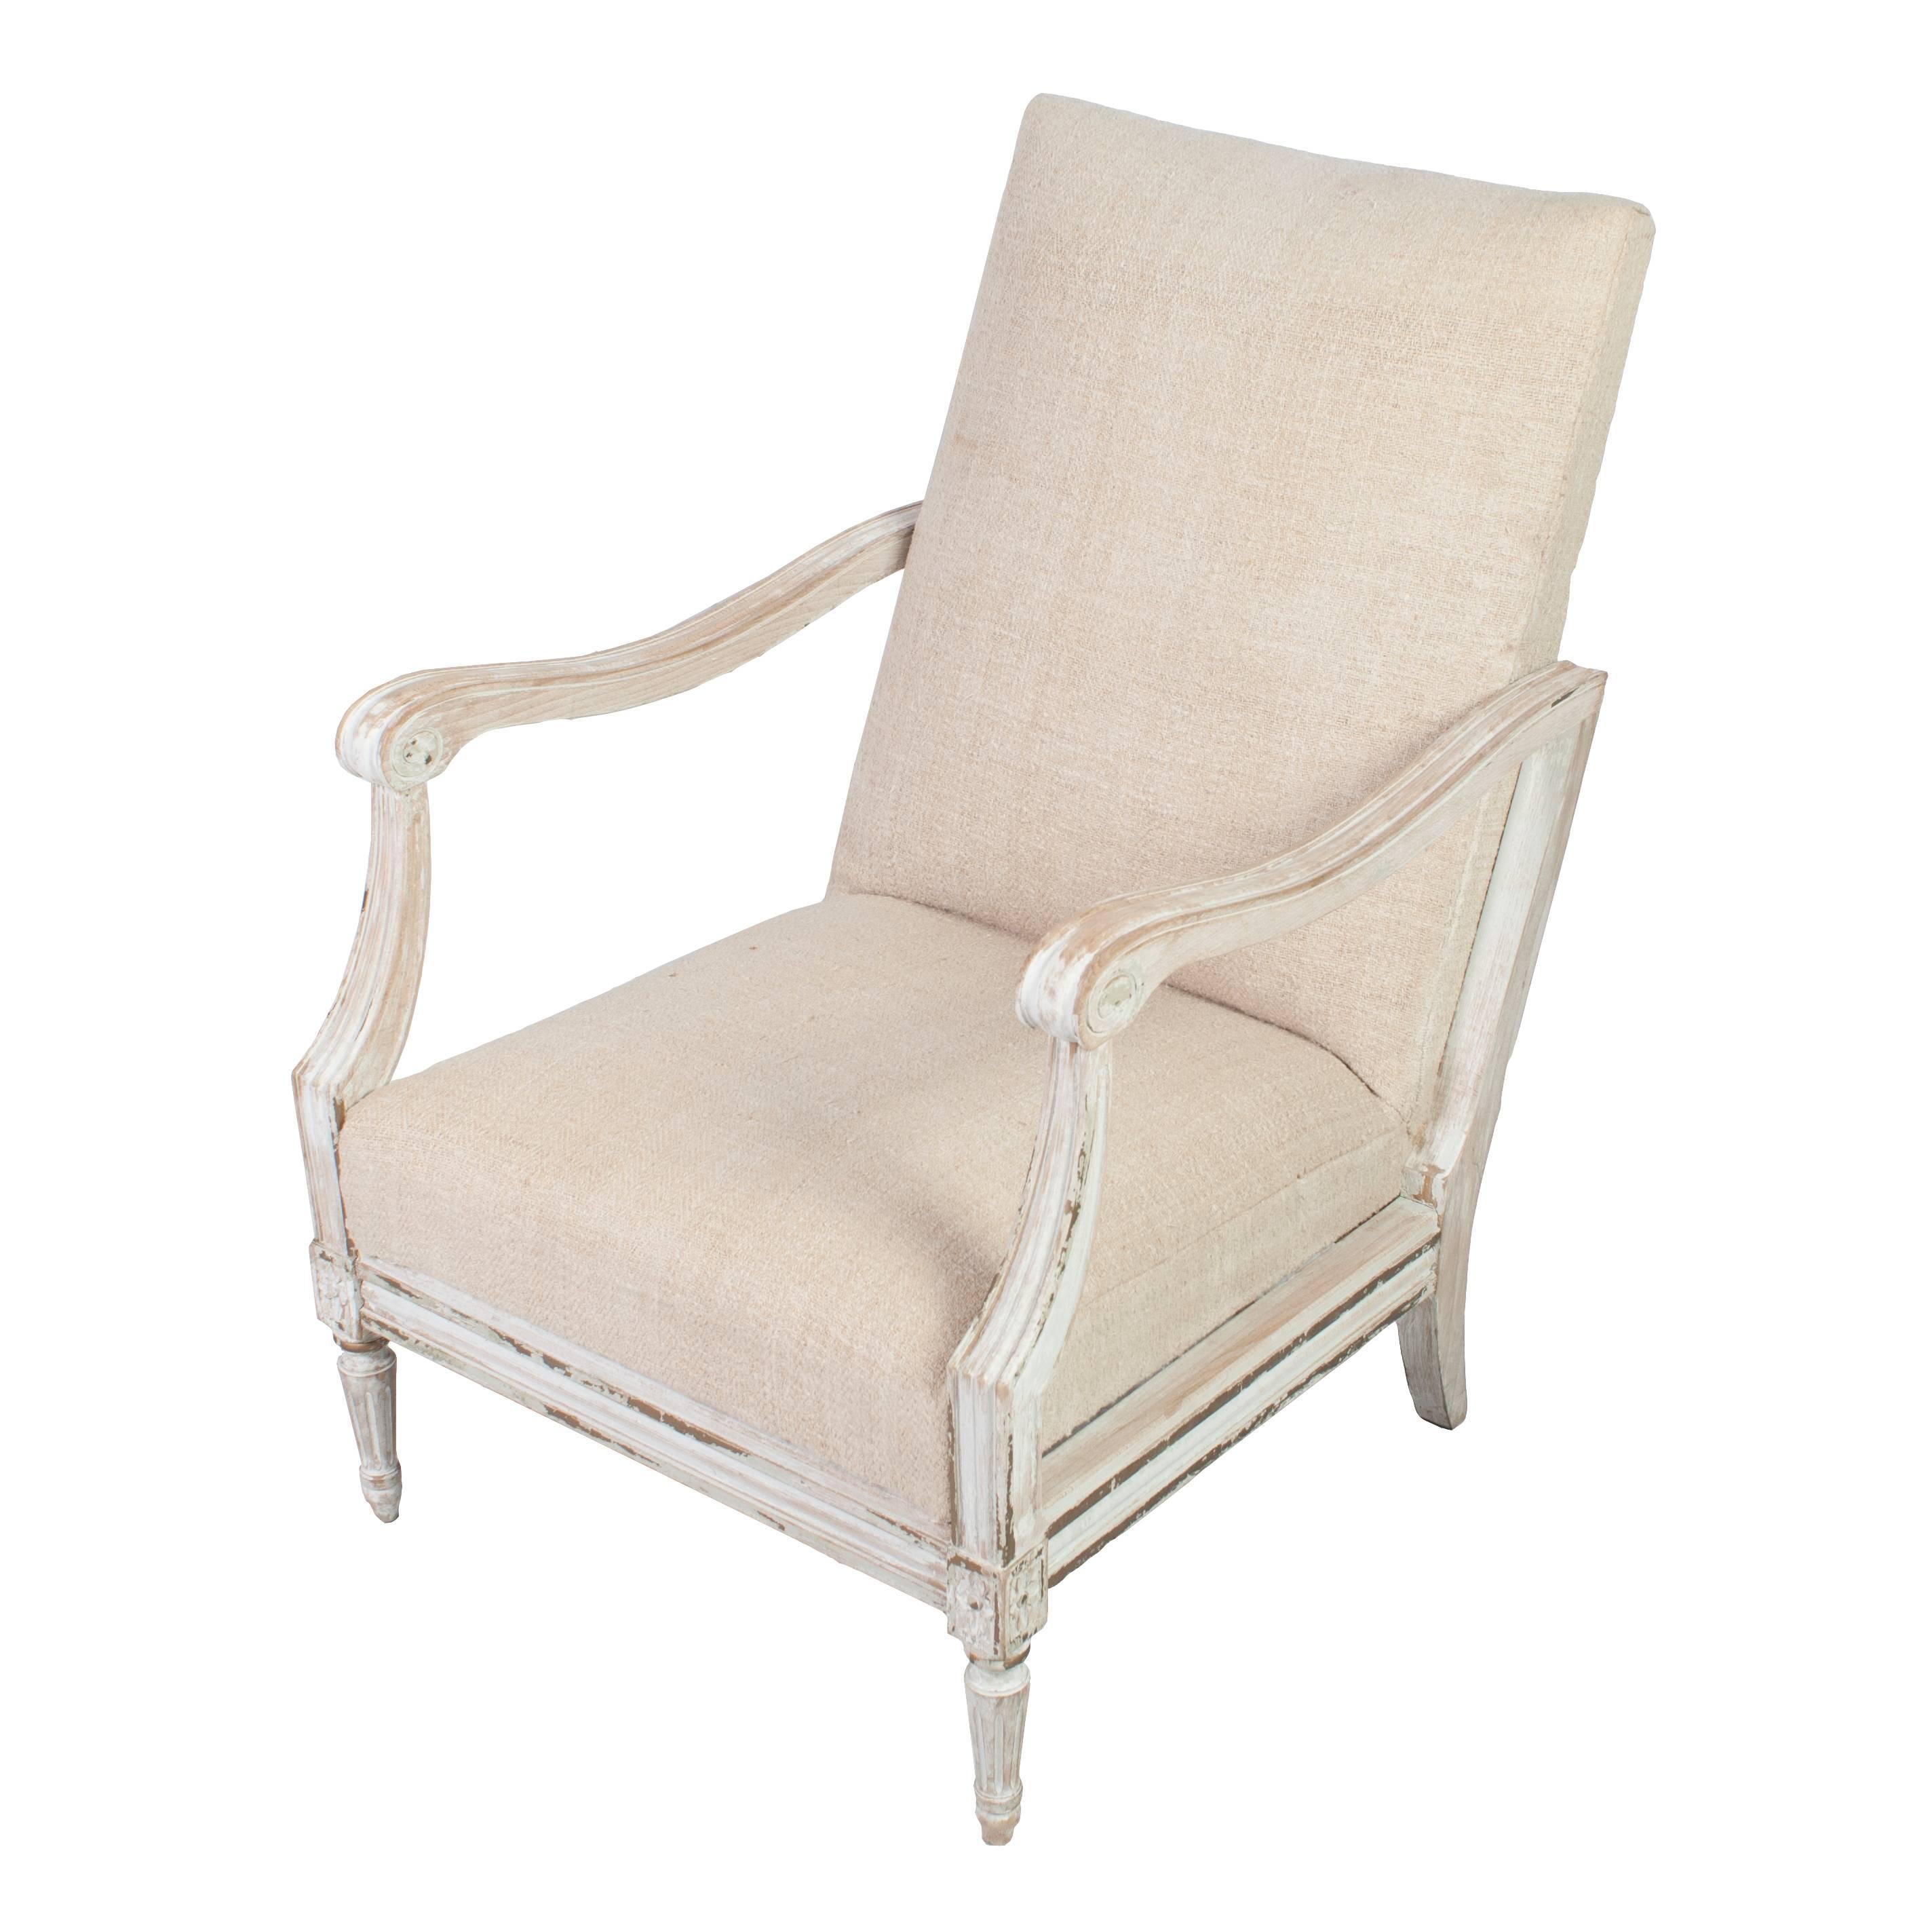 Pair of white painted fauteuils, natural wood frame, covered in antique hemp fabric. Measures: Inside seat depth 19.5 inches. Arm height 23.50 inches.